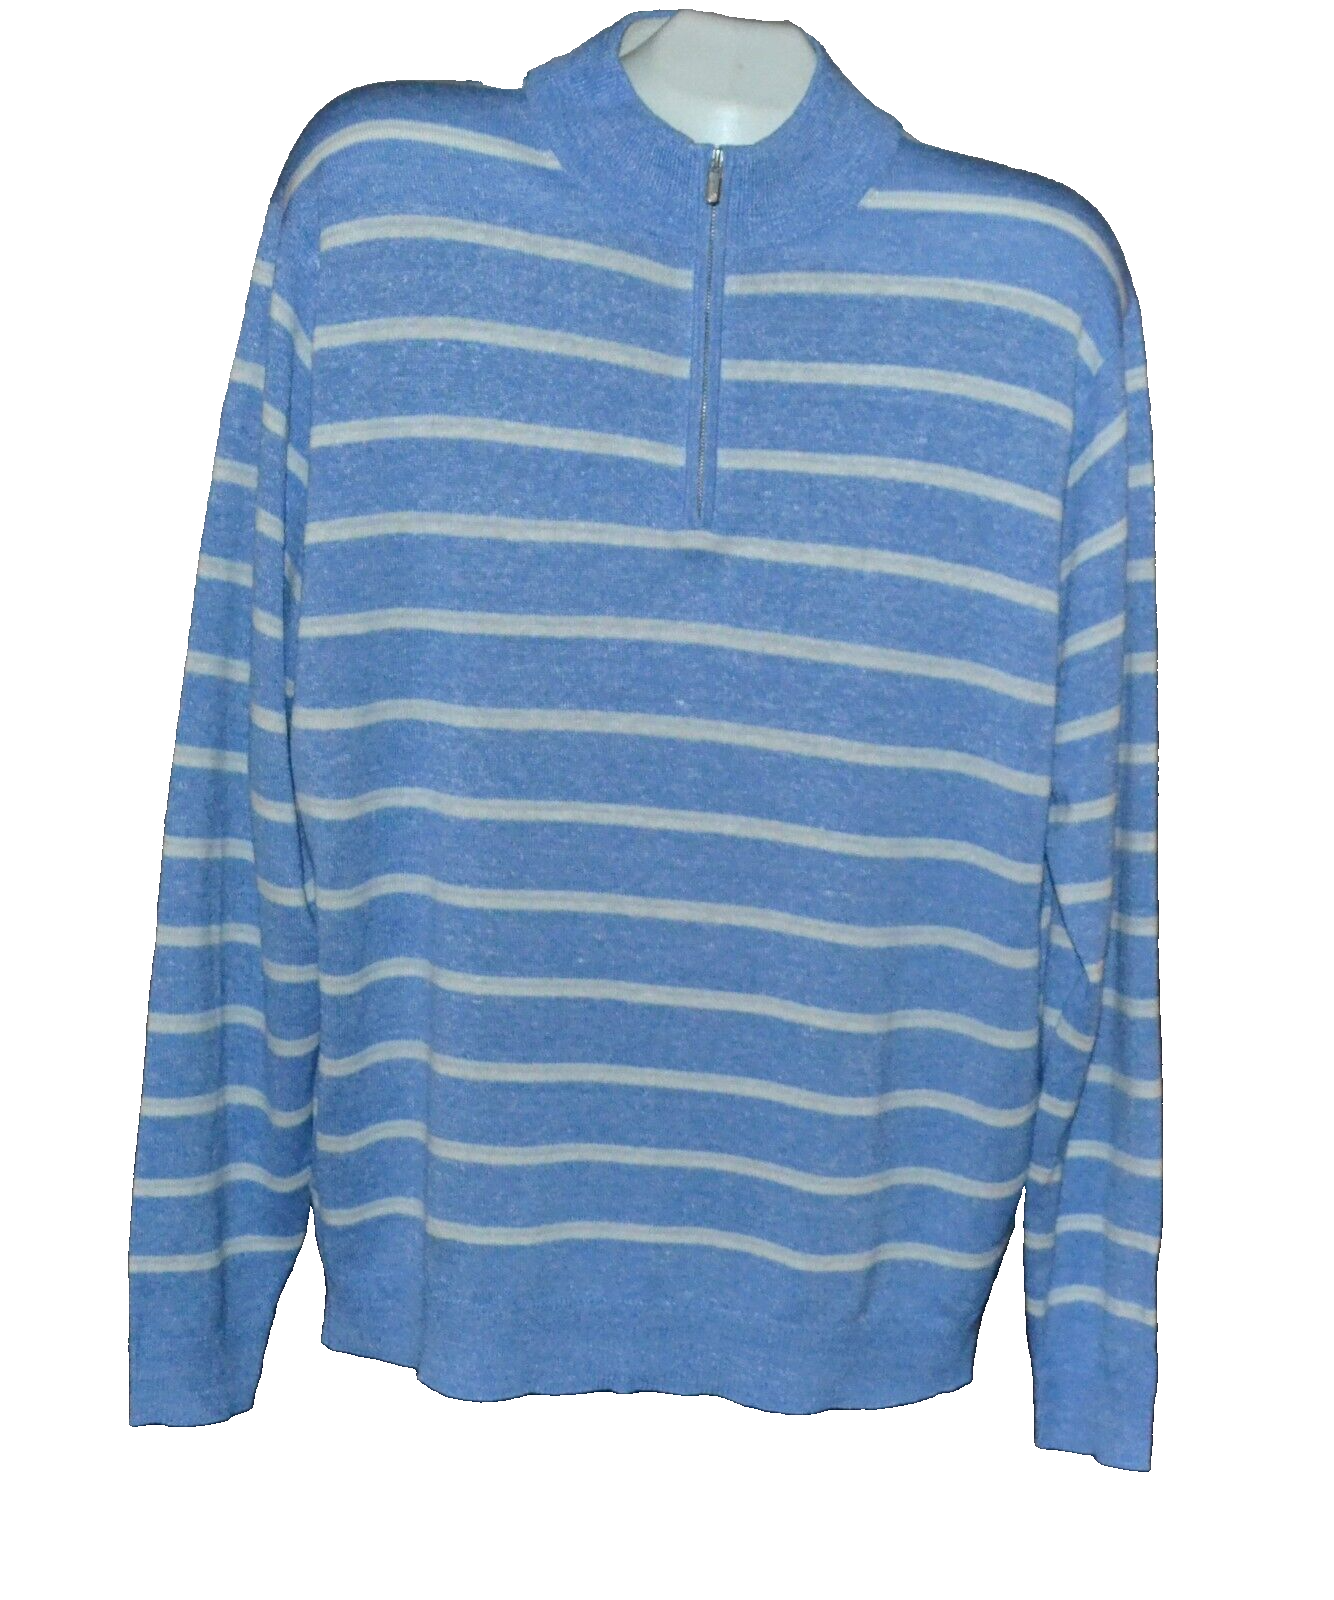 Primary image for Peter Millar Light Blue White Stripes Wool Linen Men's Knitted Sweater Size L